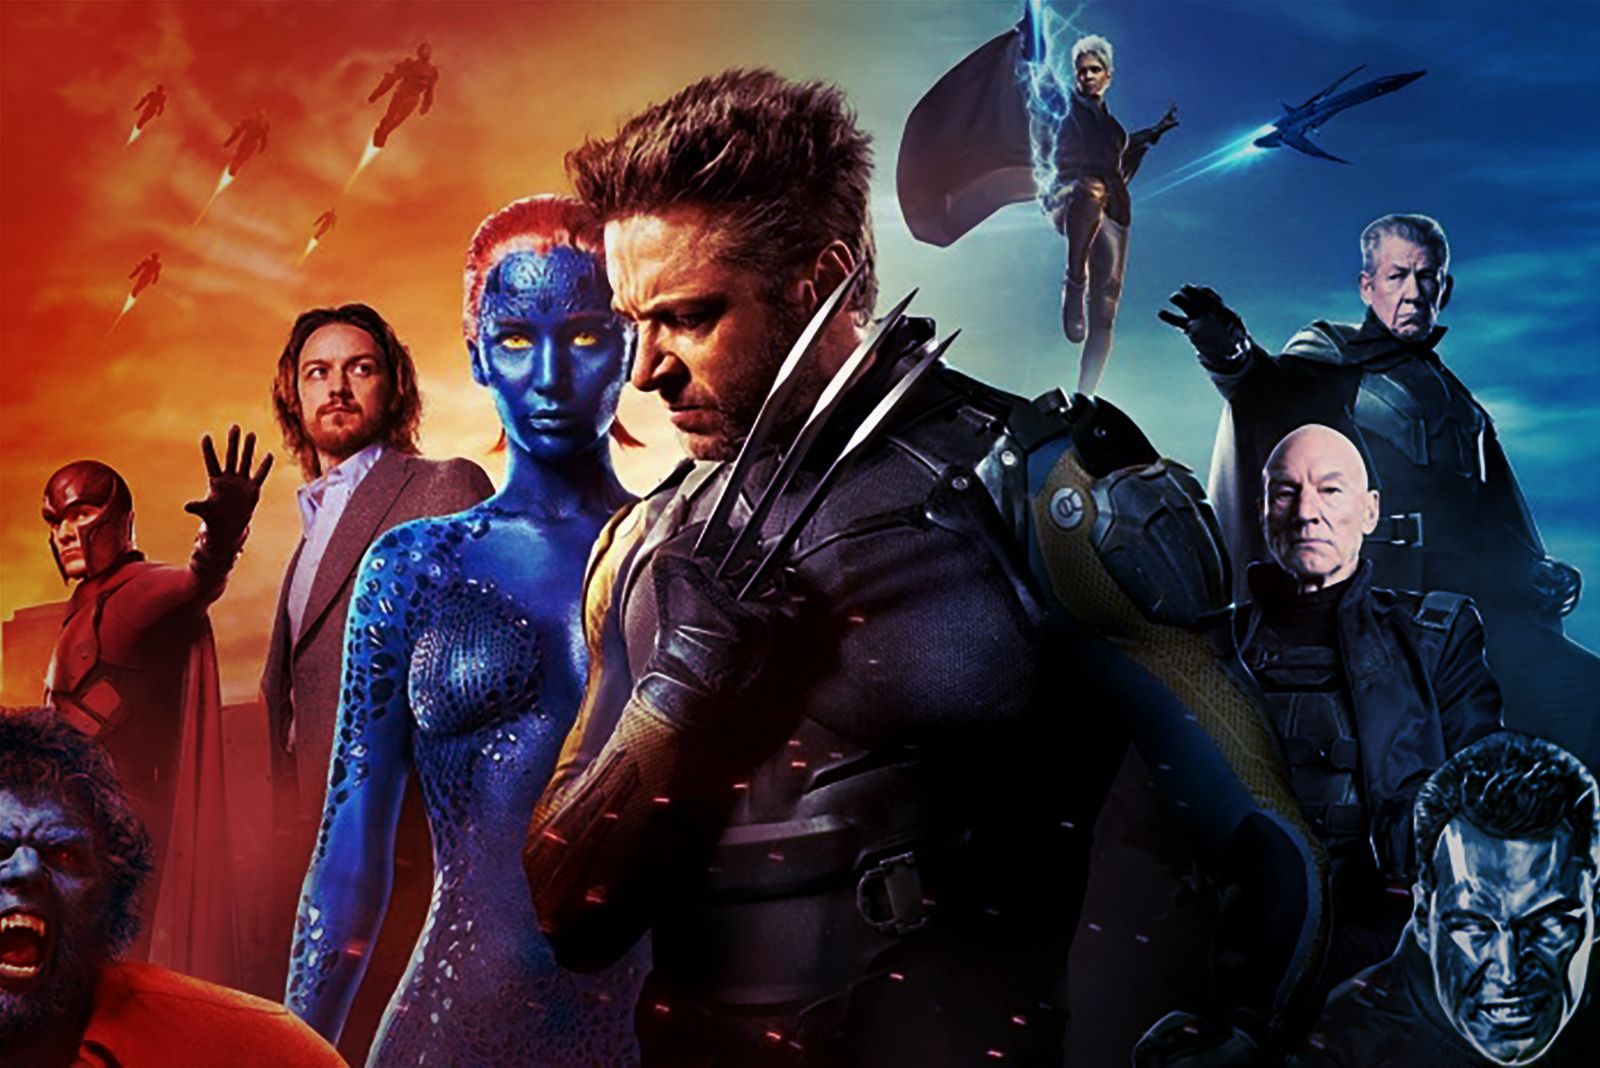 XMen chronological movie order Watch the films in order